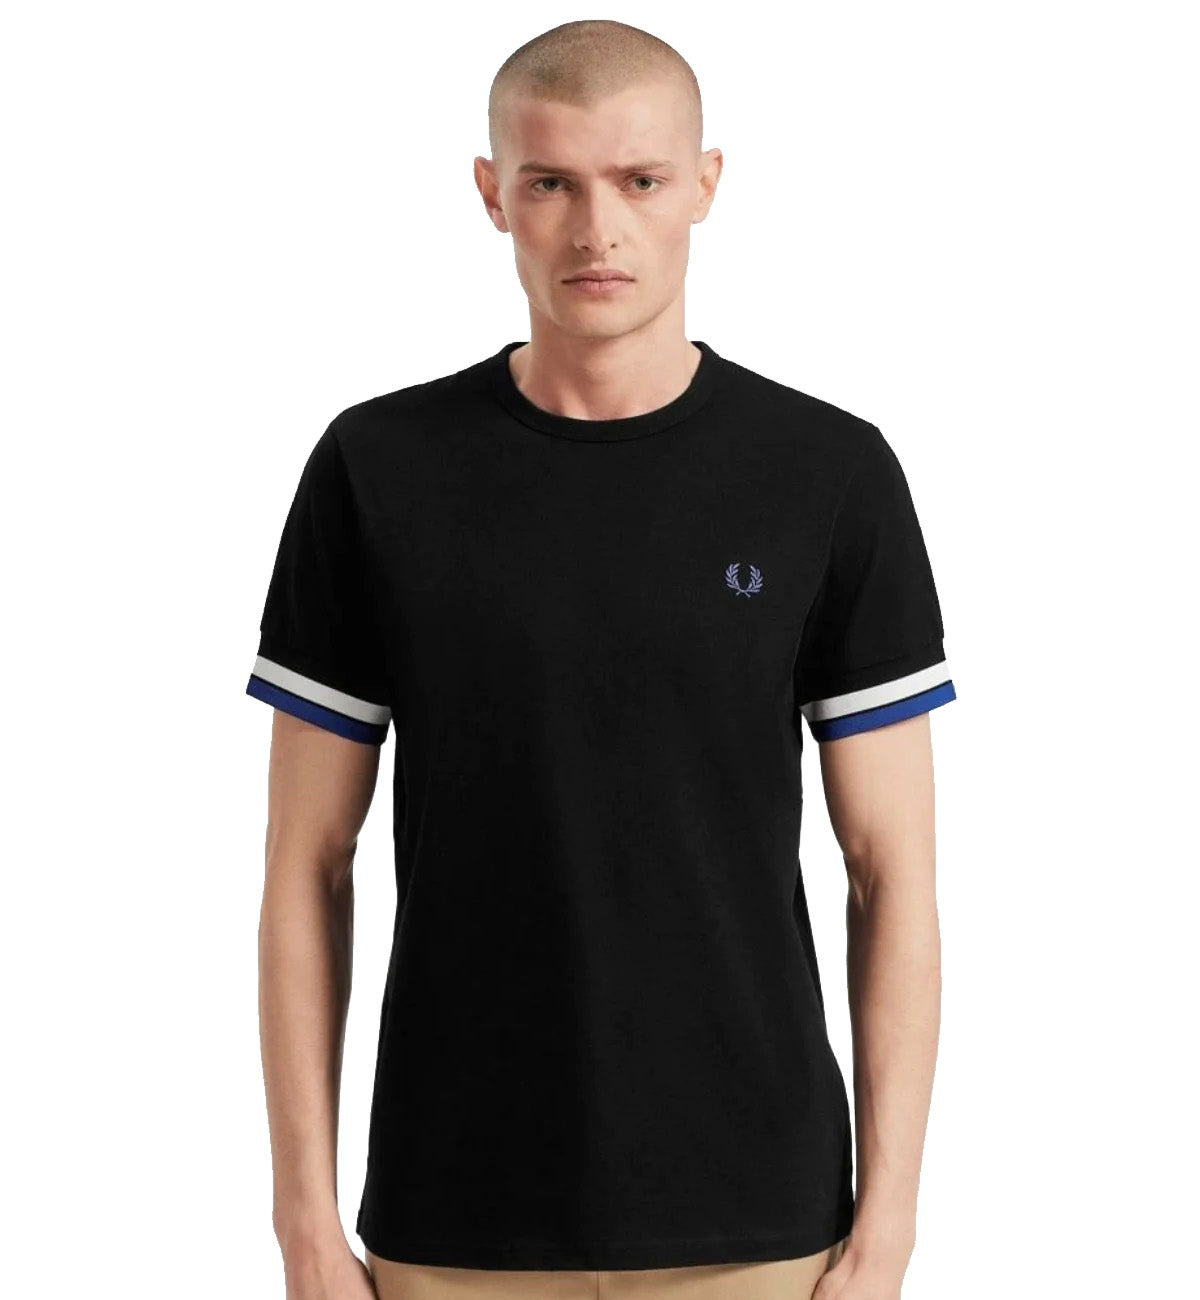 Fred Perry Black Shirt with White Blue Stripe T-Shirt